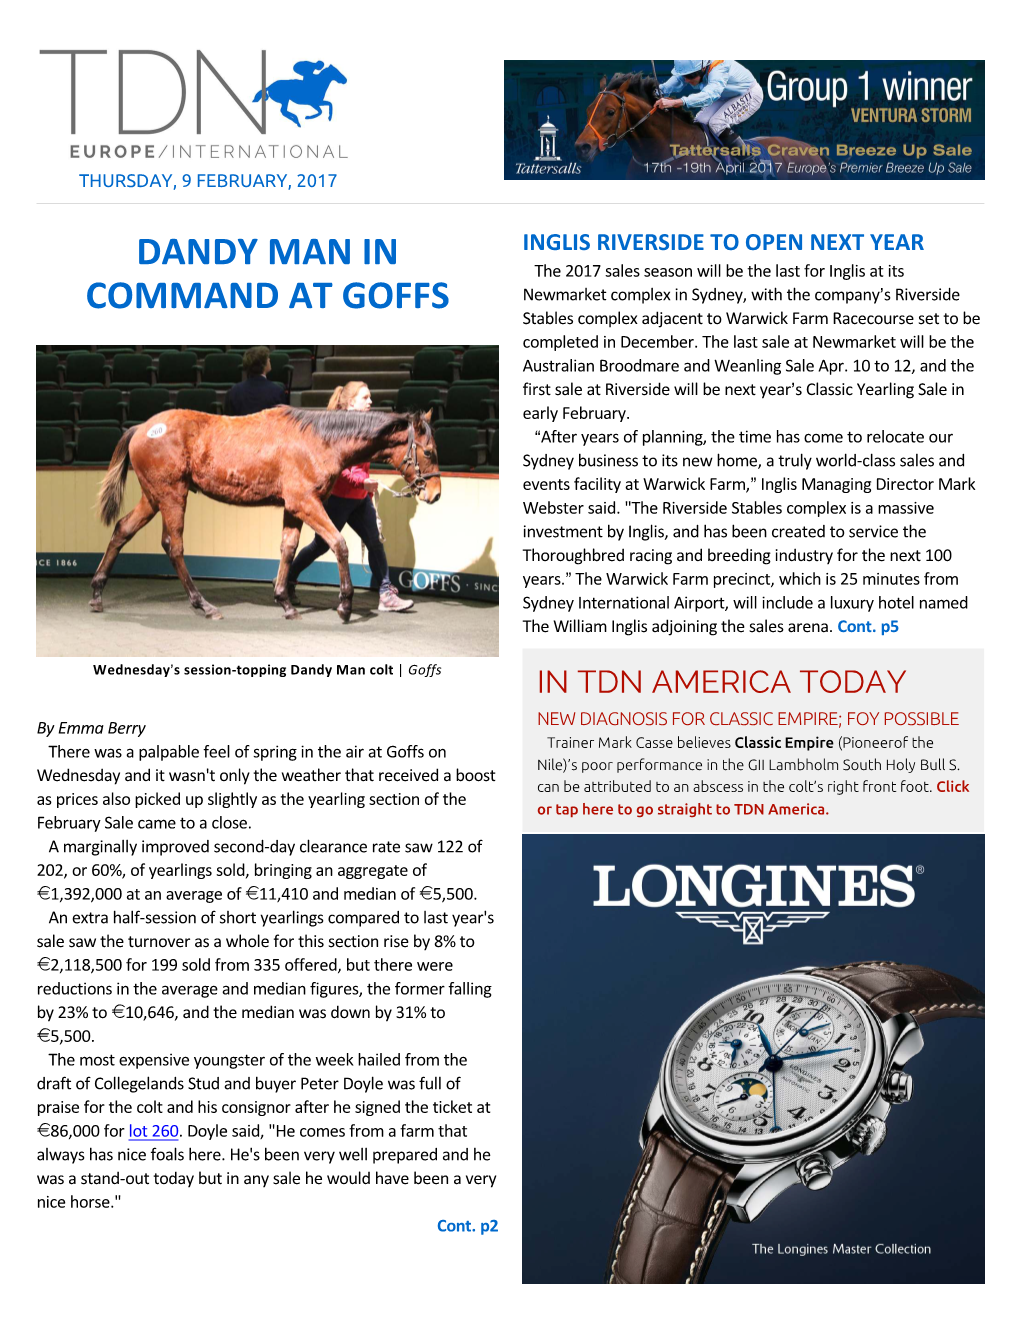 Dandy Man in Command at Goffs Cont